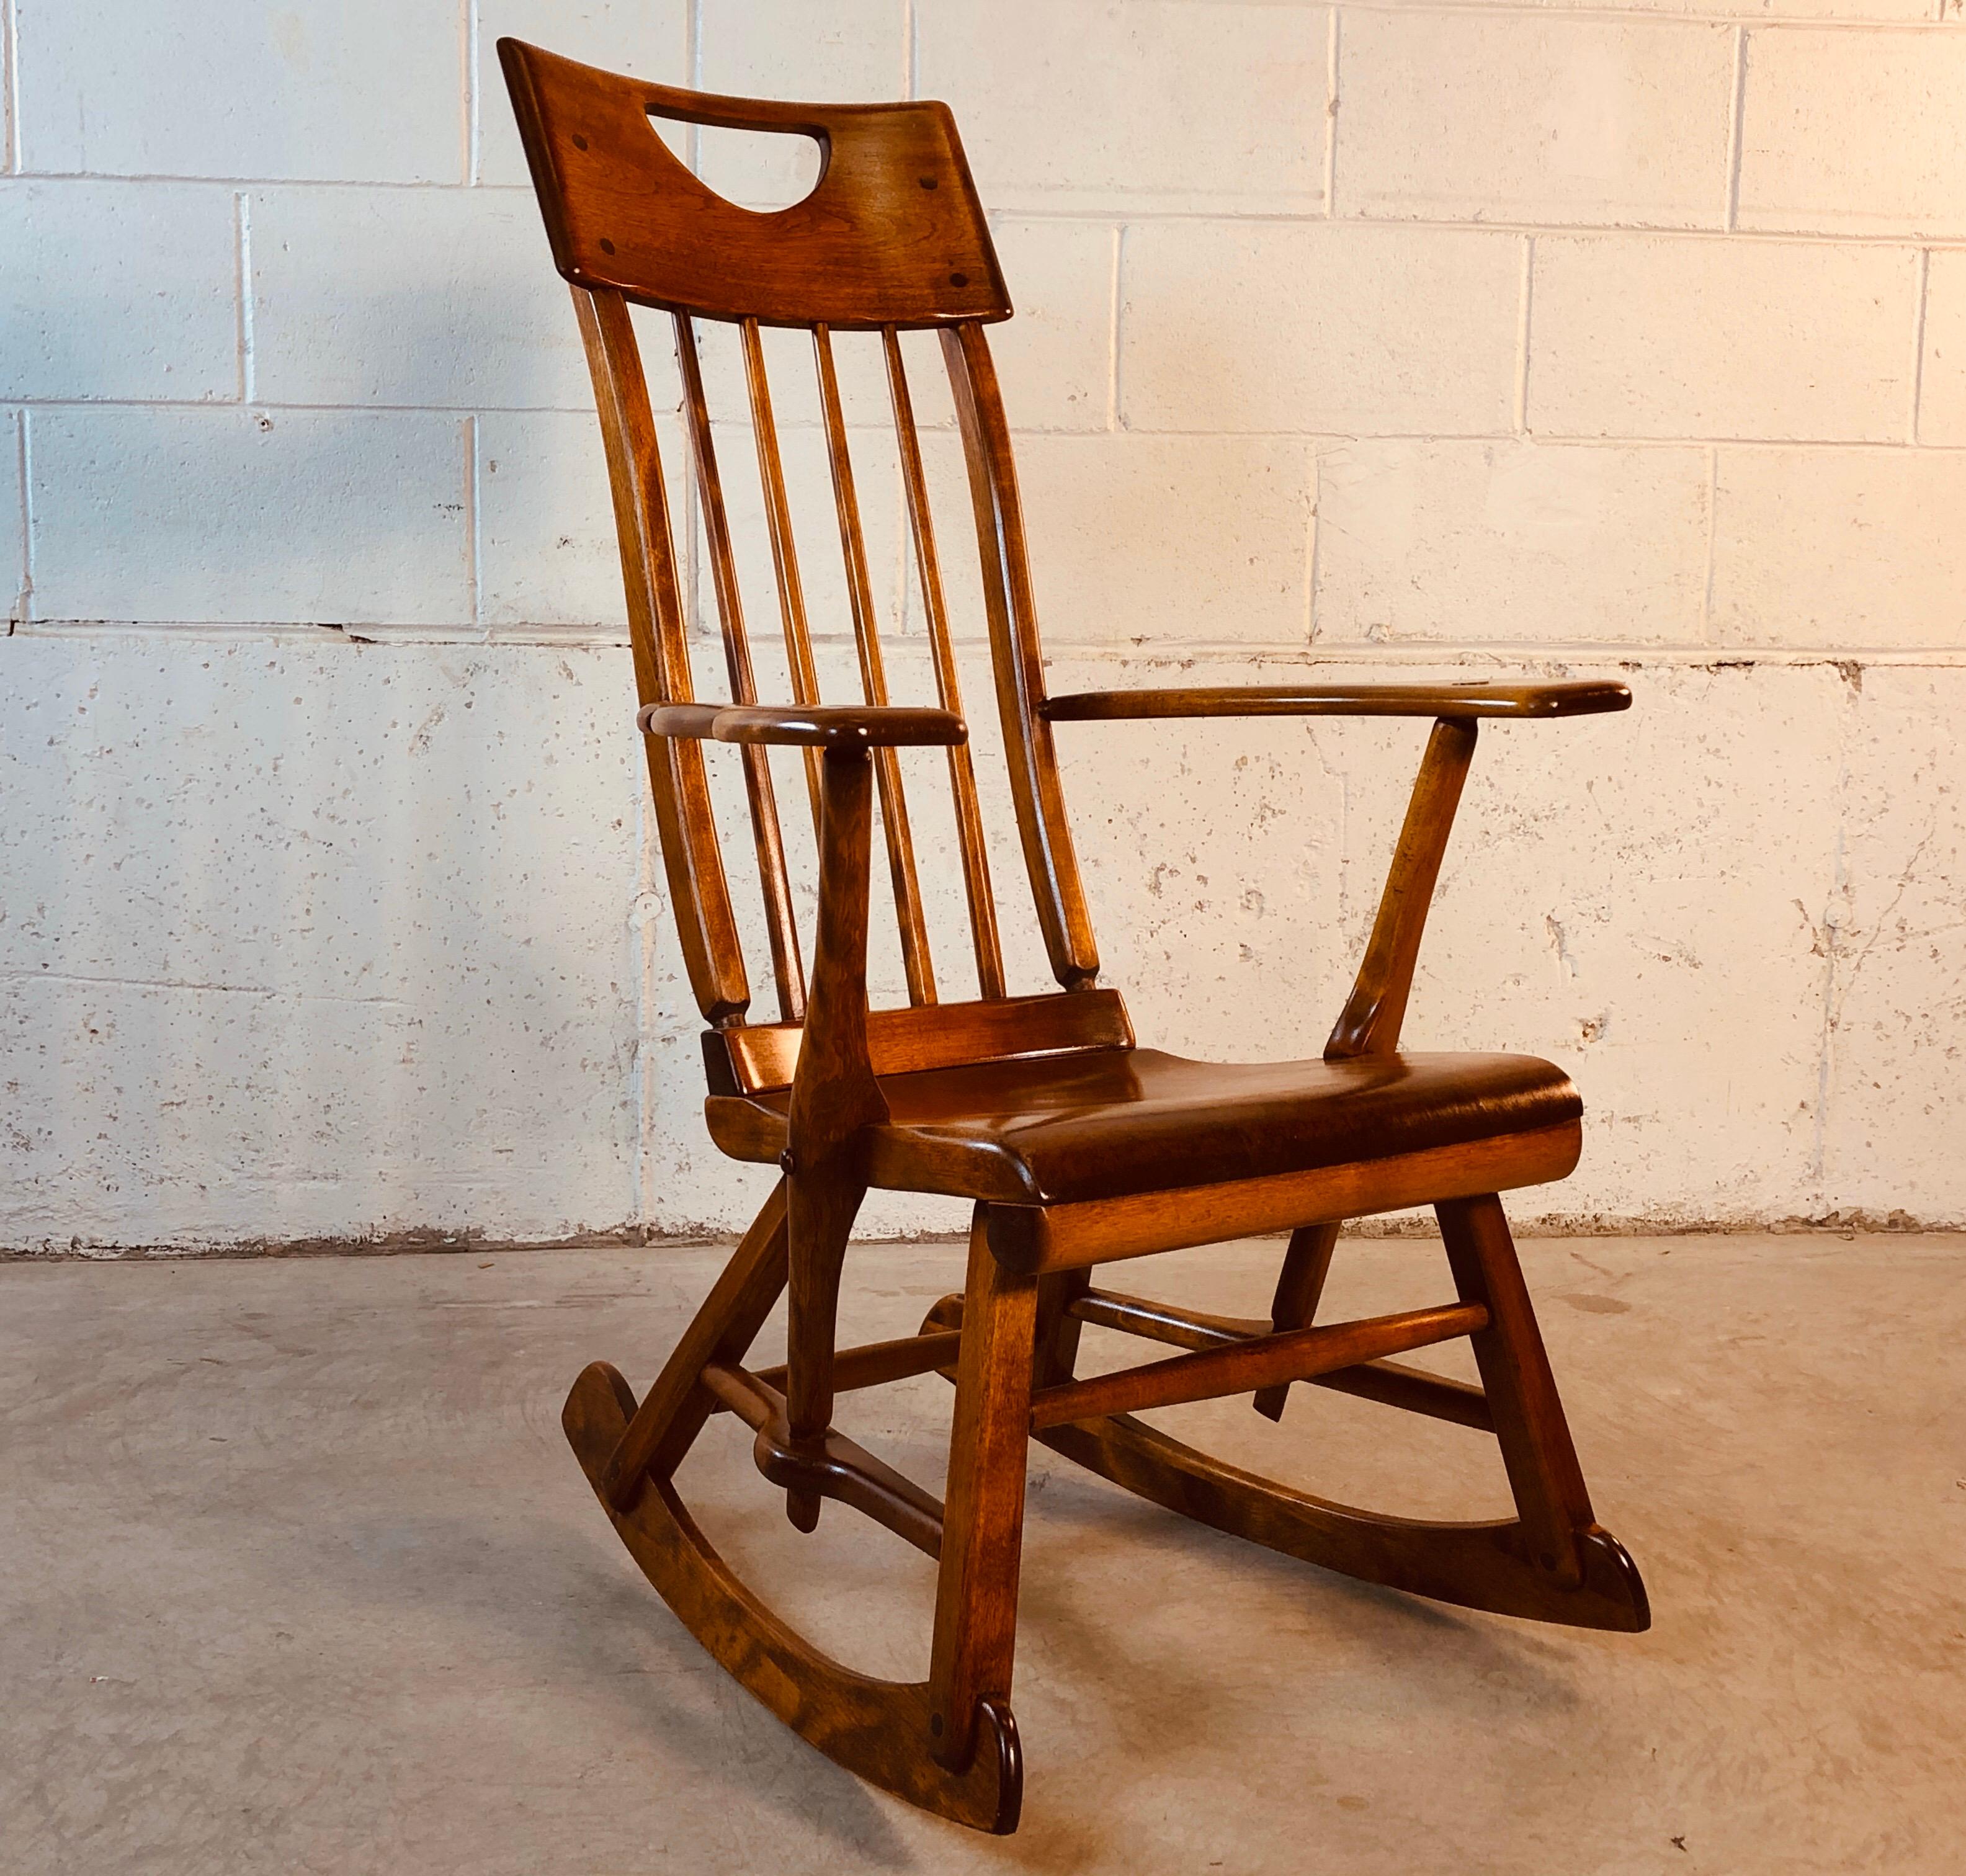 Colonial American style solid maple wood high-back rocking chair designed by Herman de Vries for Sikes Furniture Co. This rocking chair is from the 1930s and is all handmade. The chair has been restored and refinished and is in excellent condition.